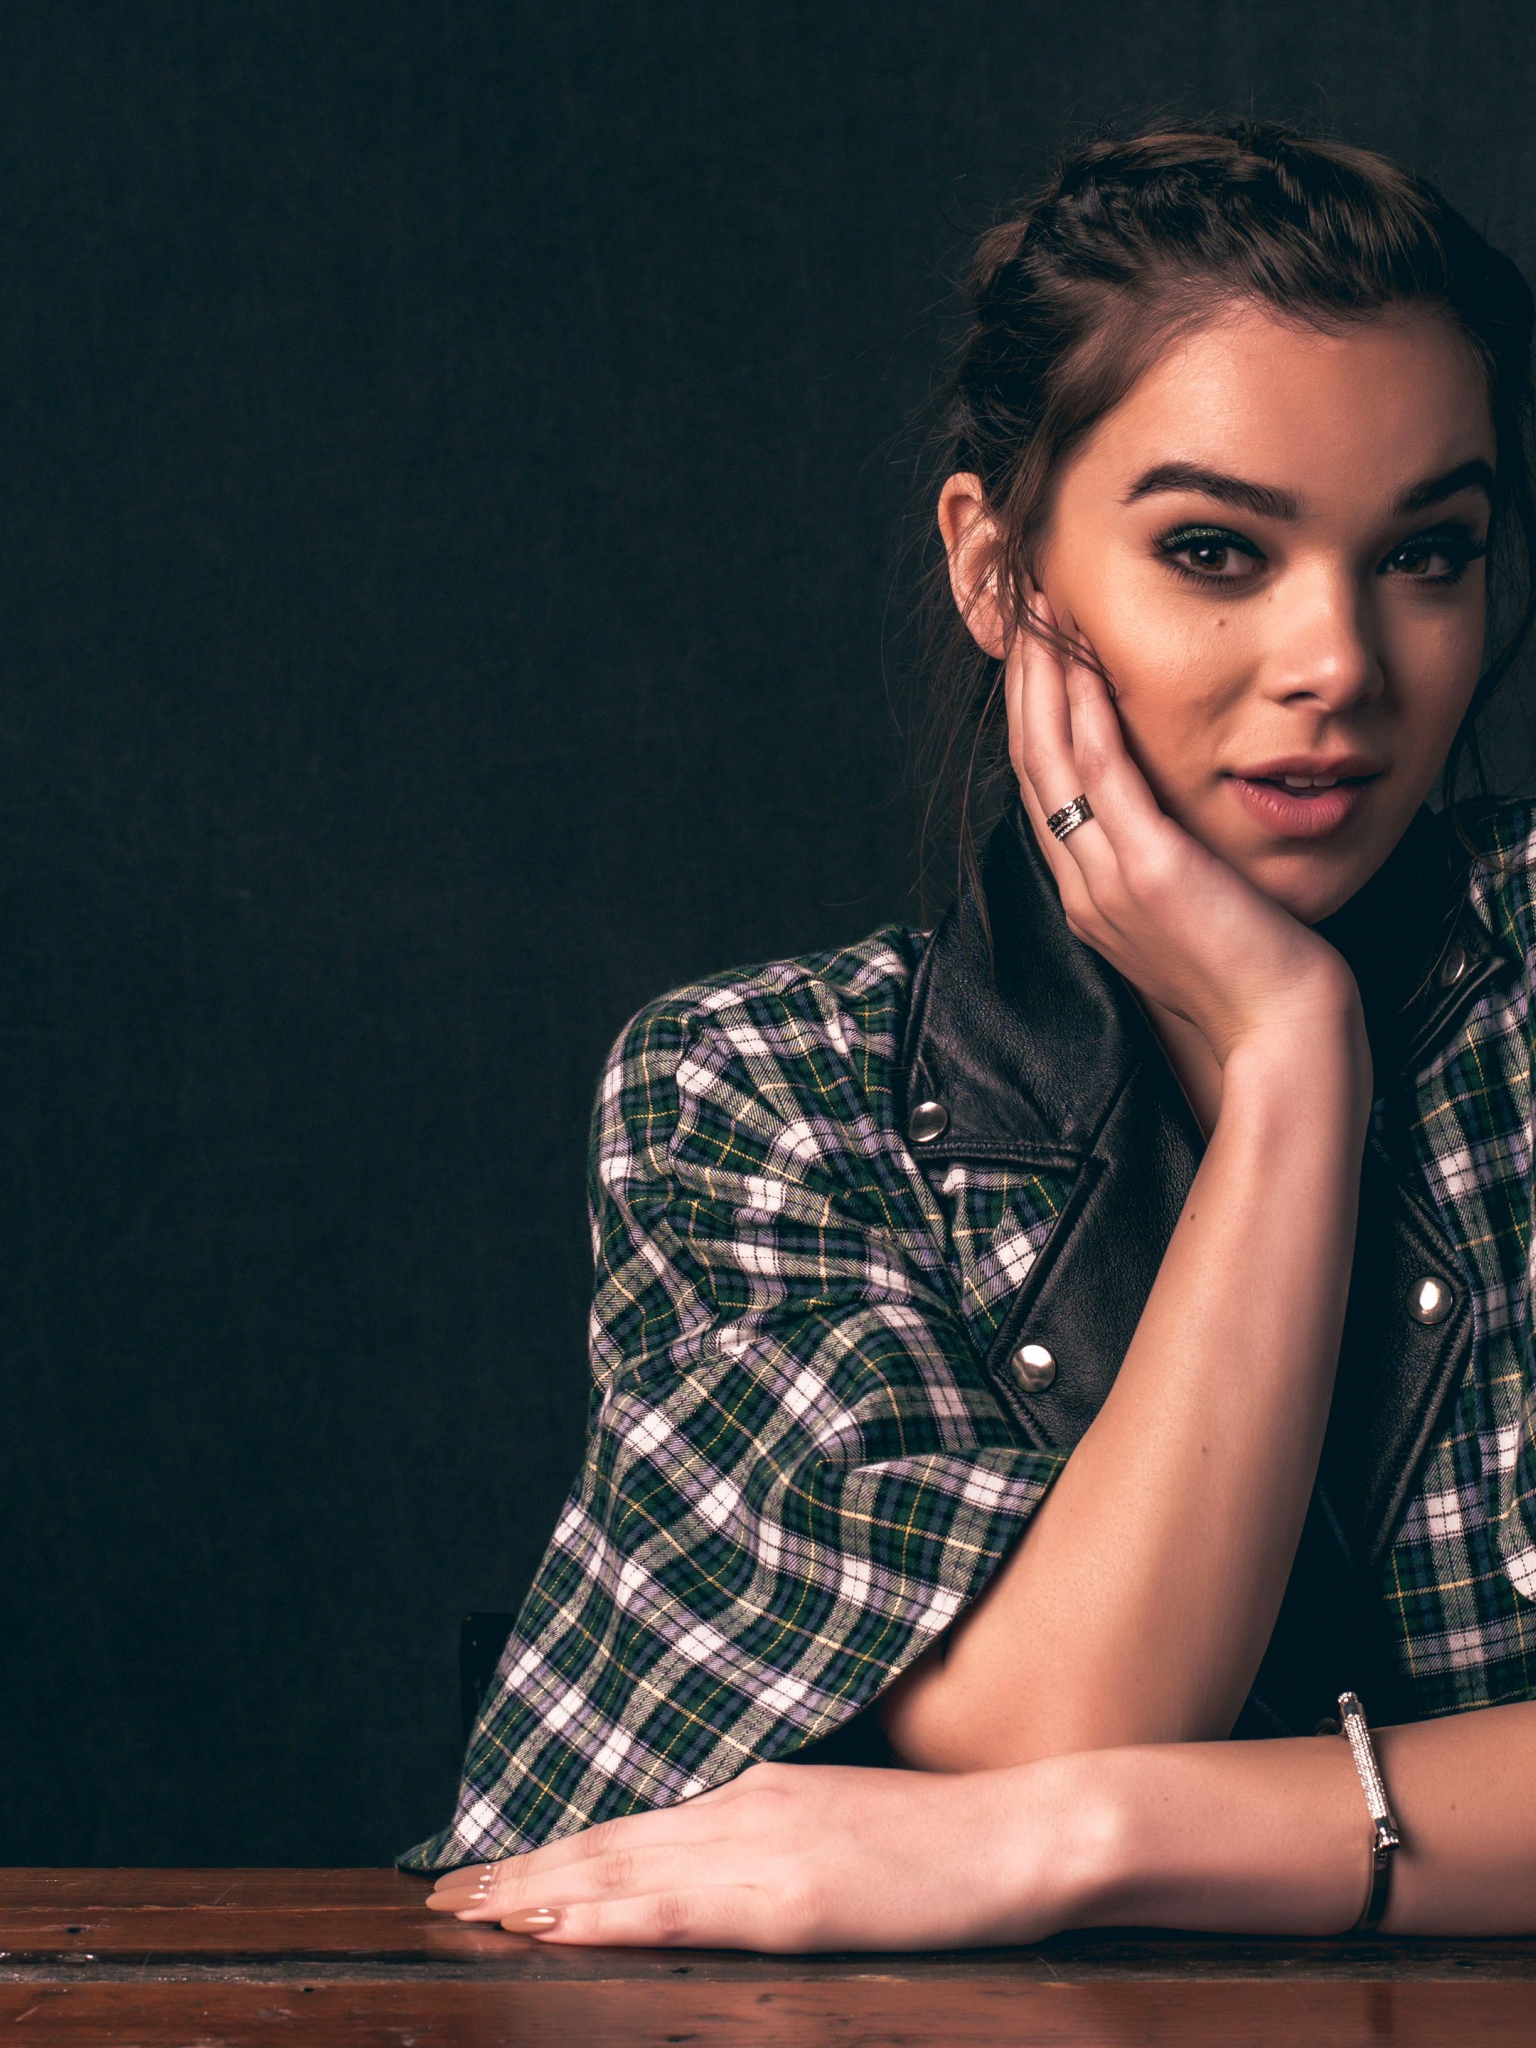 Free download 4K Hailee Steinfeld Wallpaper Background 197 5120x2880 px [5120x2880] for your Desktop, Mobile & Tablet. Explore Hailee Steinfeld 4k Wallpaper. Hailee Steinfeld 4k Wallpaper, 4K Wallpaper, Wallpaper 4K